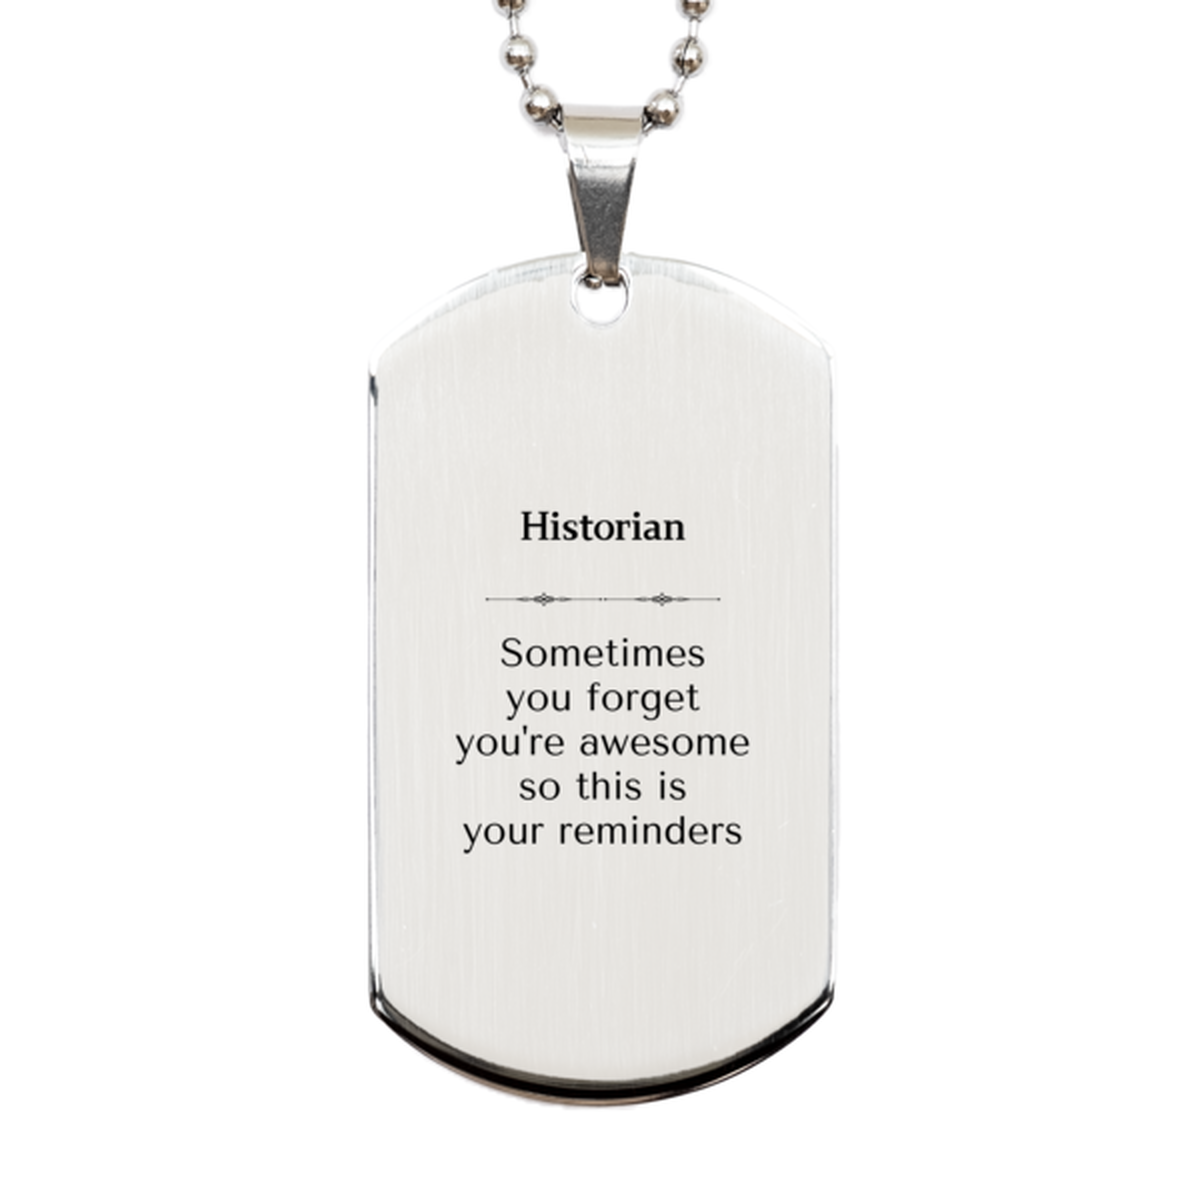 Sentimental Historian Silver Dog Tag, Historian Sometimes you forget you're awesome so this is your reminders, Graduation Christmas Birthday Gifts for Historian, Men, Women, Coworkers